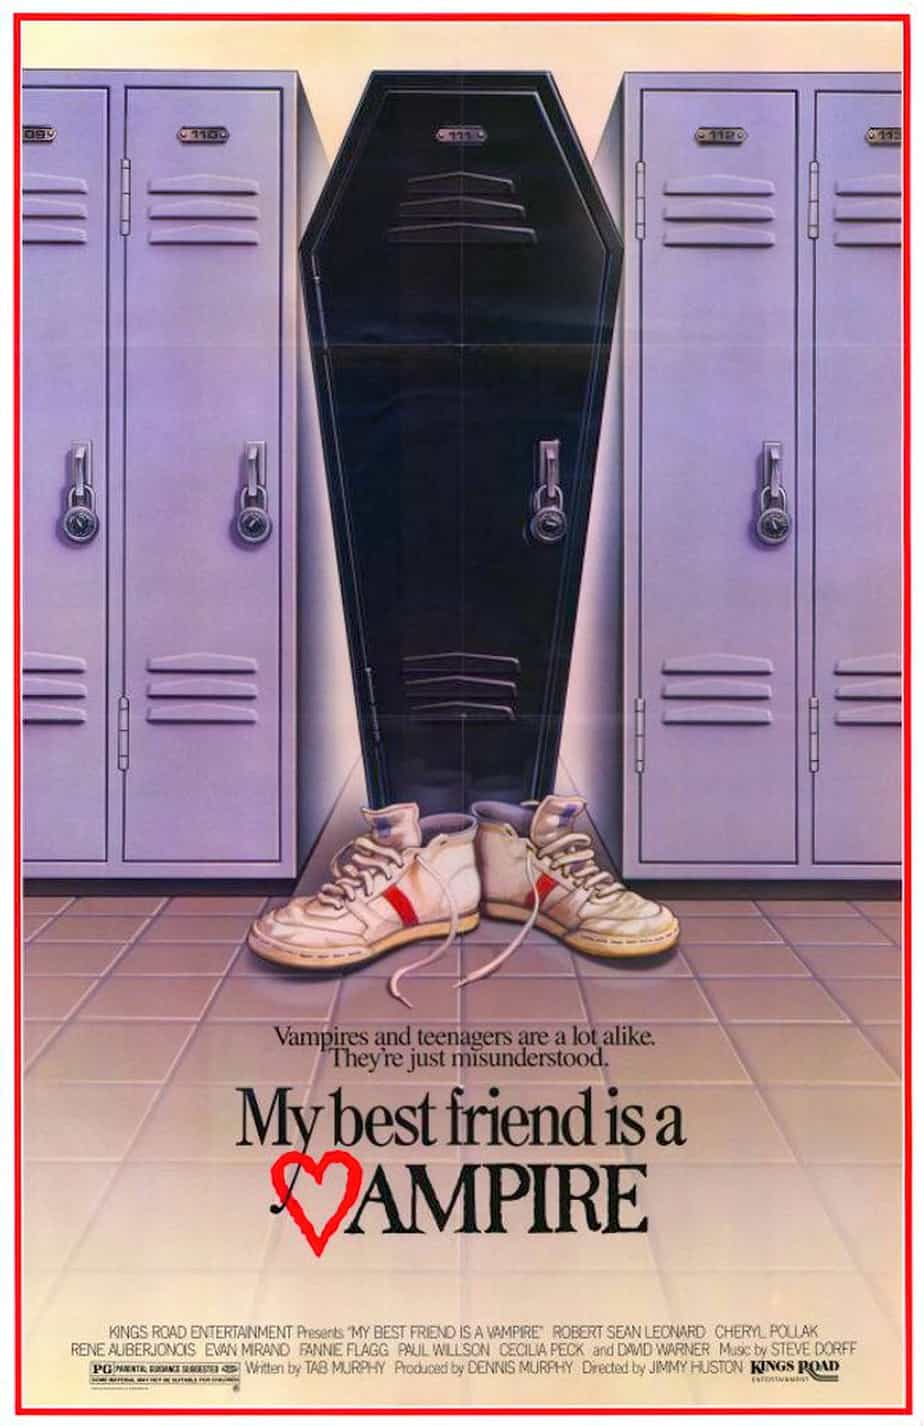 My Best Friend Is a Vampire (also known as I Was a Teenage Vampire) is a 1987 American comedy horror film directed by Jimmy Huston. The story revolves around a newly made vampire who is trying to live as a "good" vampire and not feed on humans.